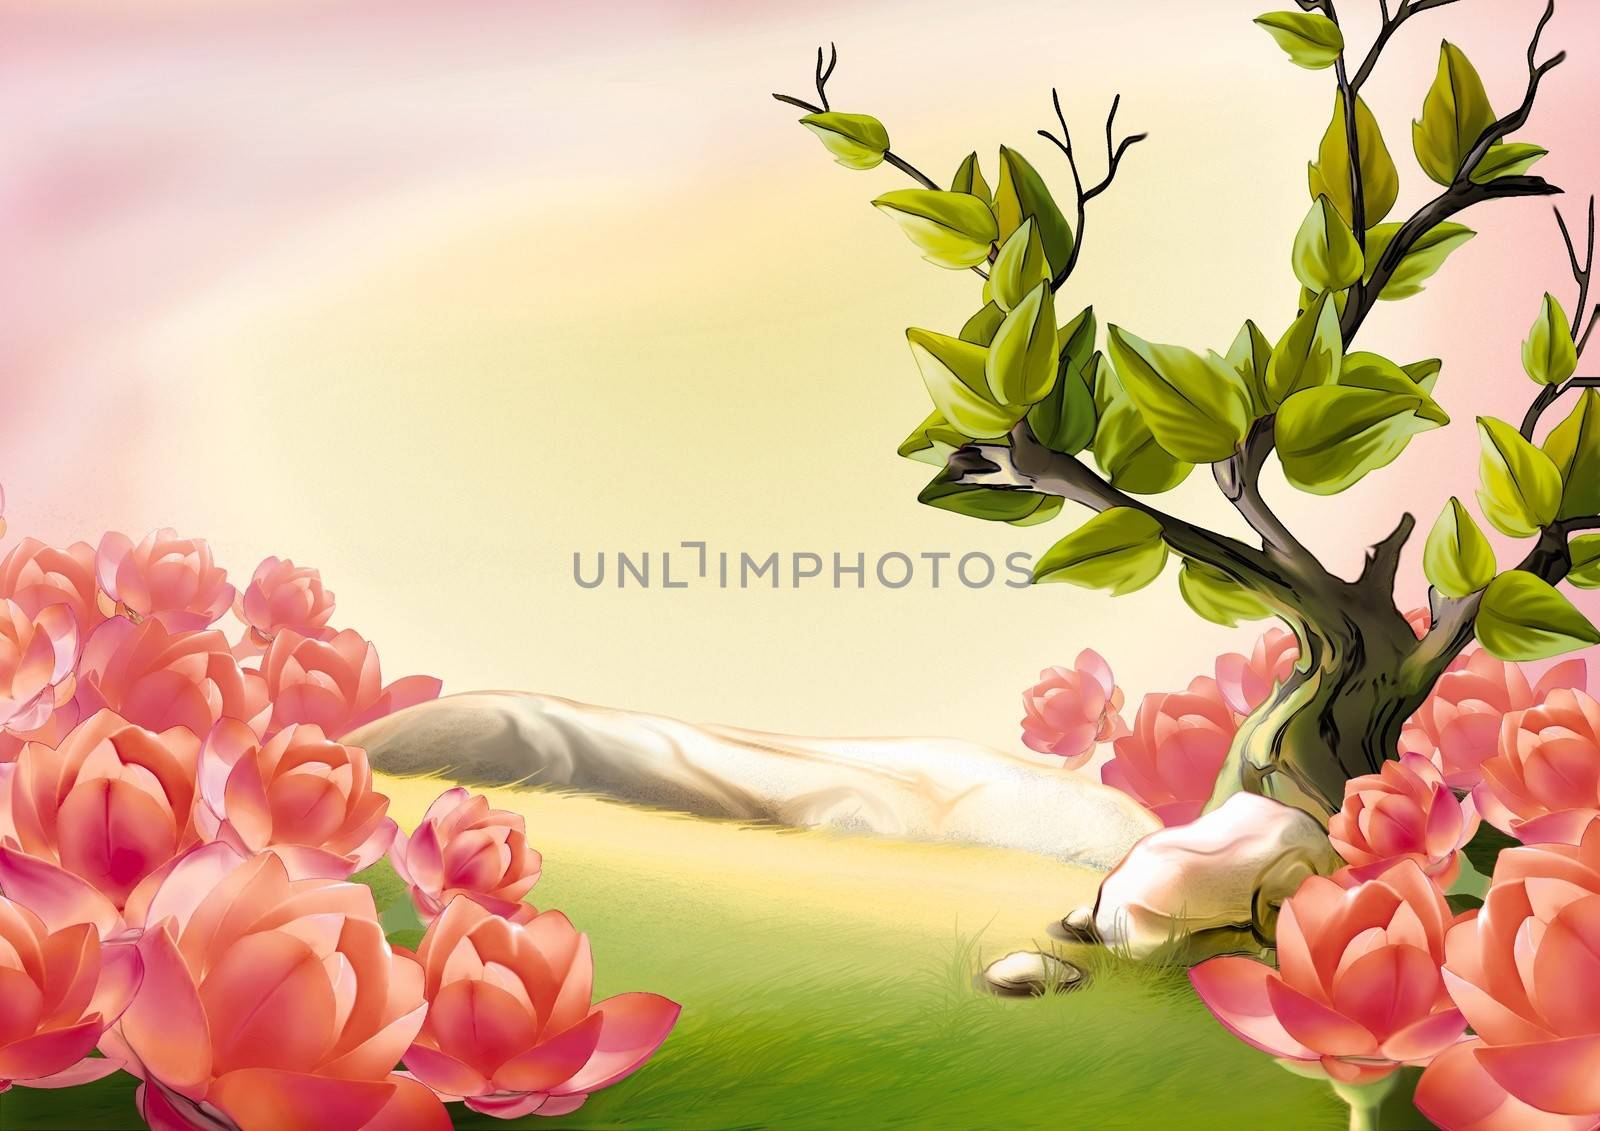 Meadow And Red Flowers - Background Illustration